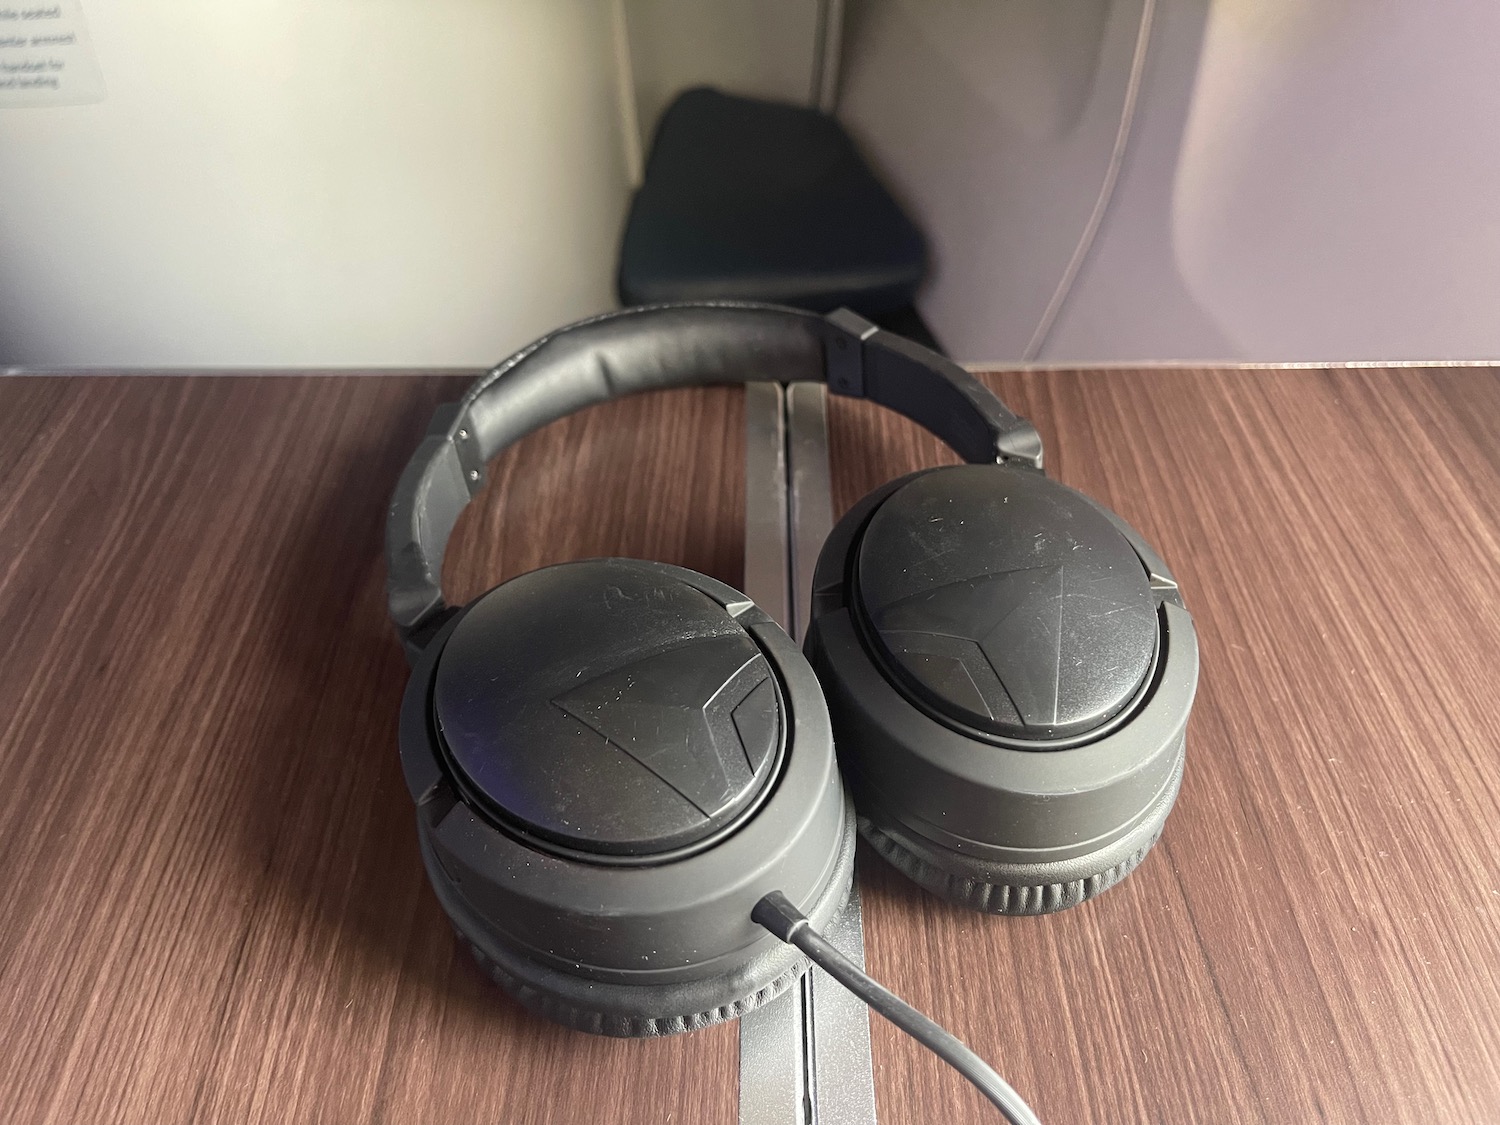 a pair of black headphones on a wood surface